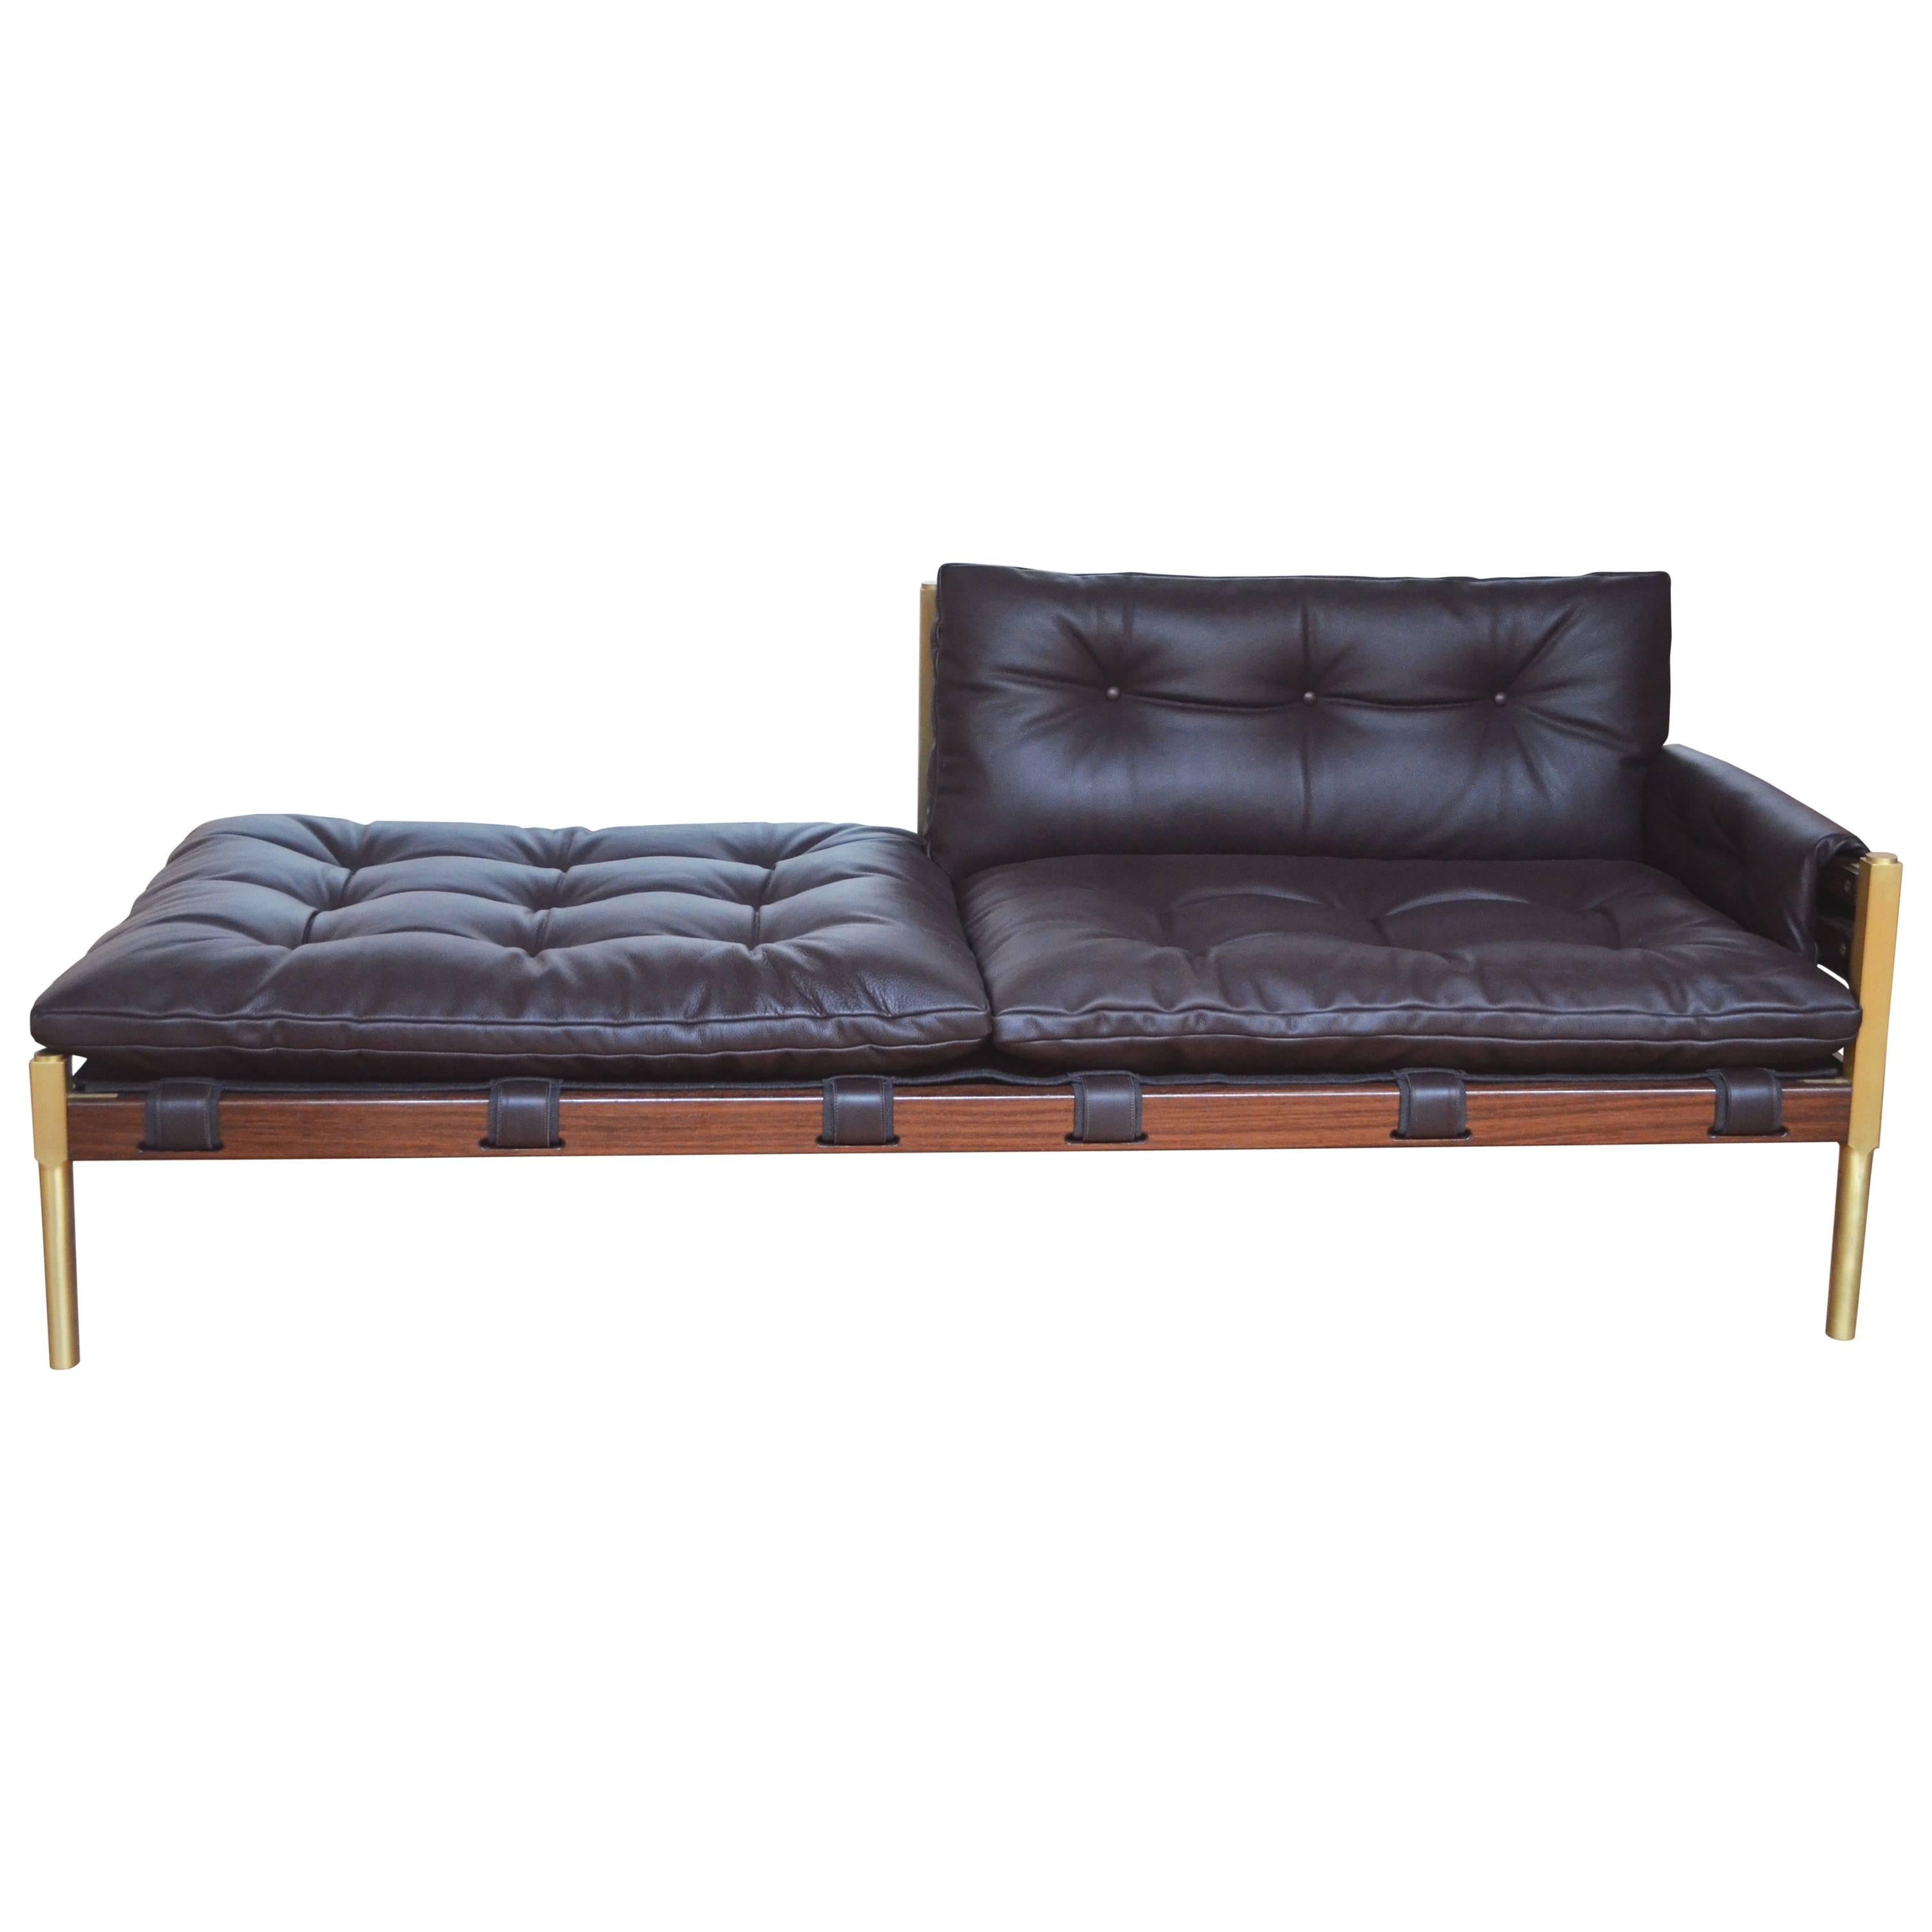 Brazilian Mid-Century Modern Inspired Campanha Chaise Lounge in Leather For Sale